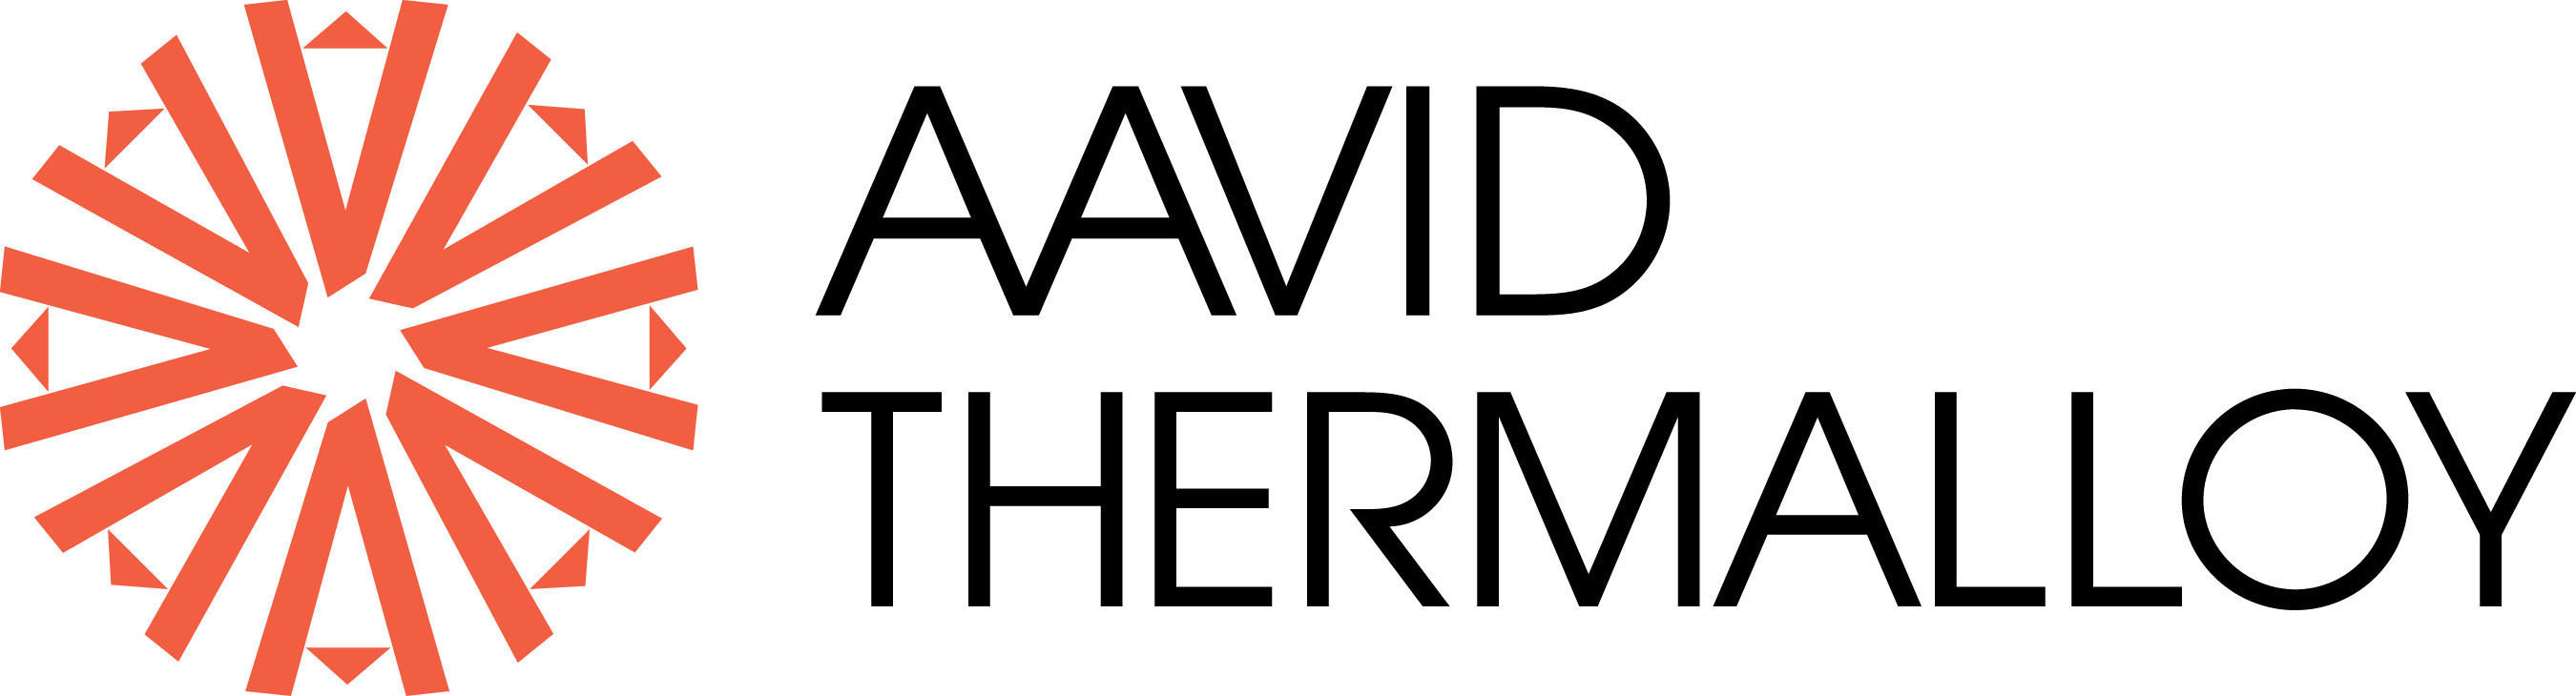 Aavid Thermalloy logo